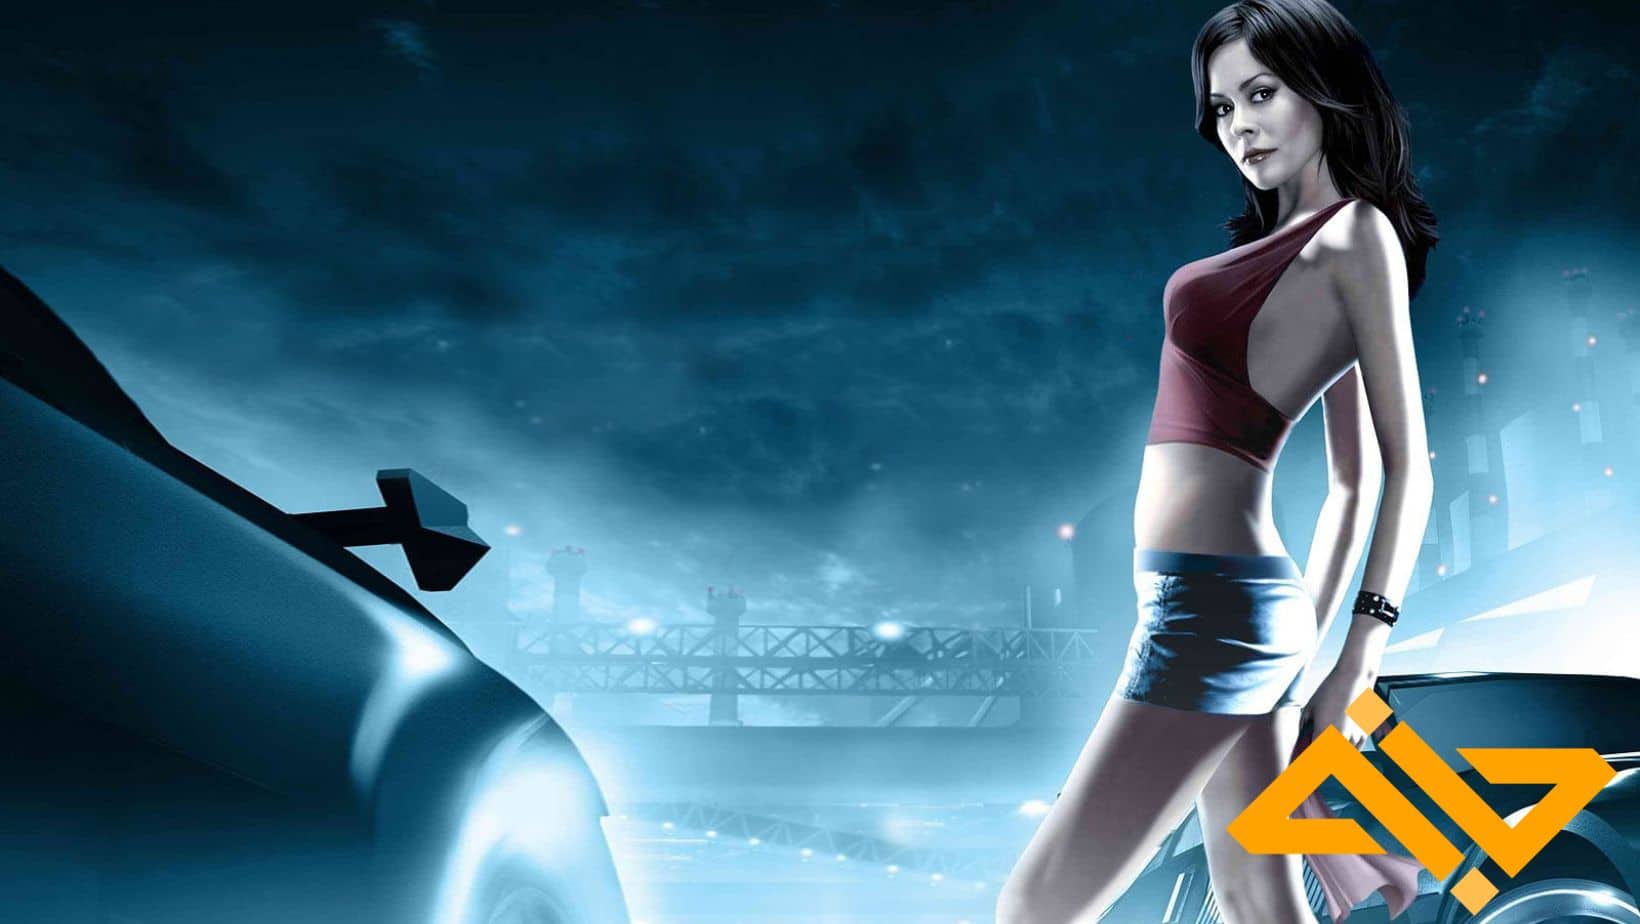 Need for Speed: Underground 2 offered us the first open-world Need for Speed to play.